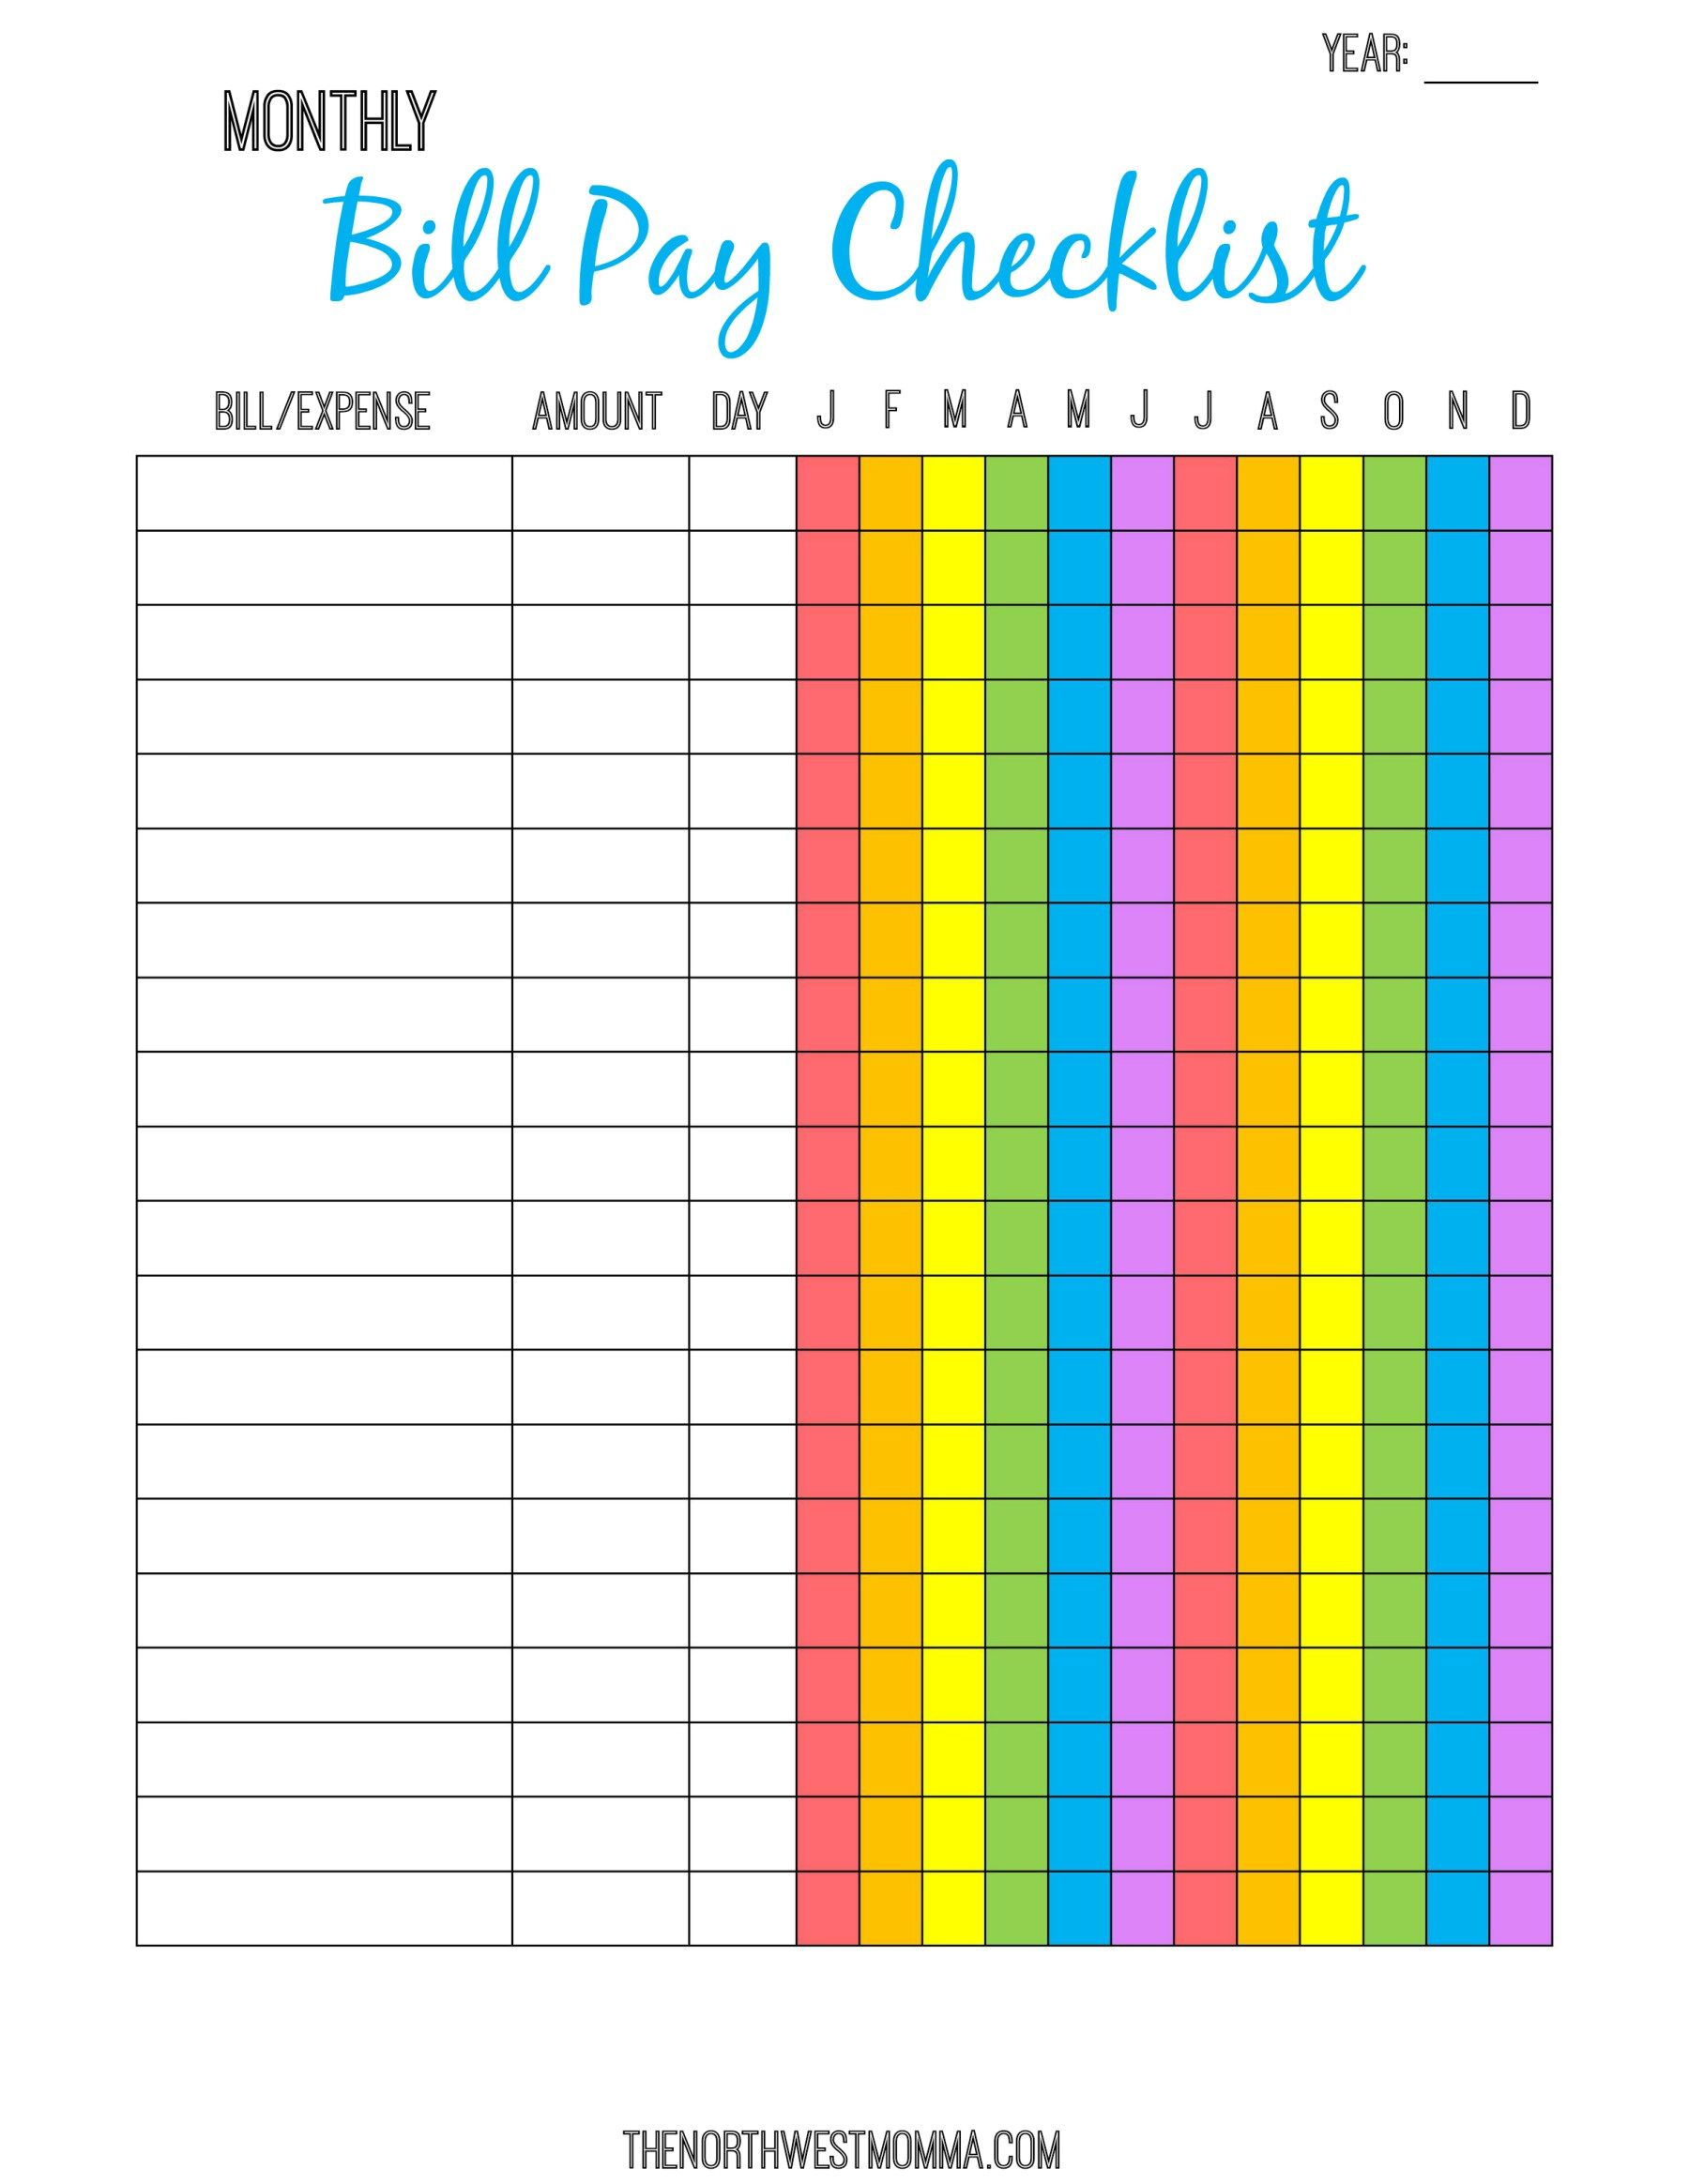 Monthly Bill Pay Checklist- Free Printable | $ Saving Money - Free Printable Bill Payment Checklist